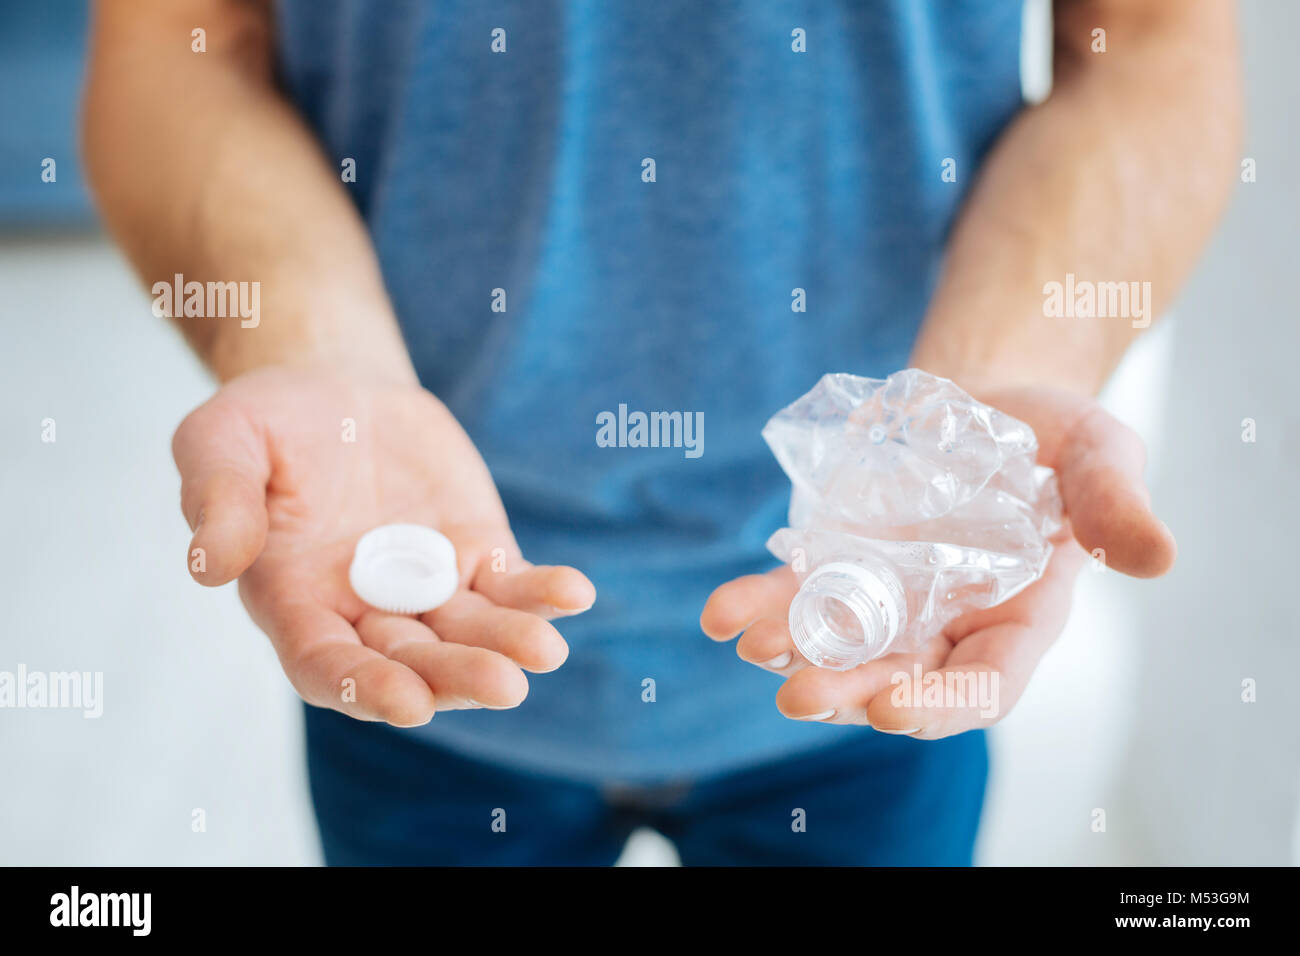 Male hands holding a crushed plastic bottle Stock Photo